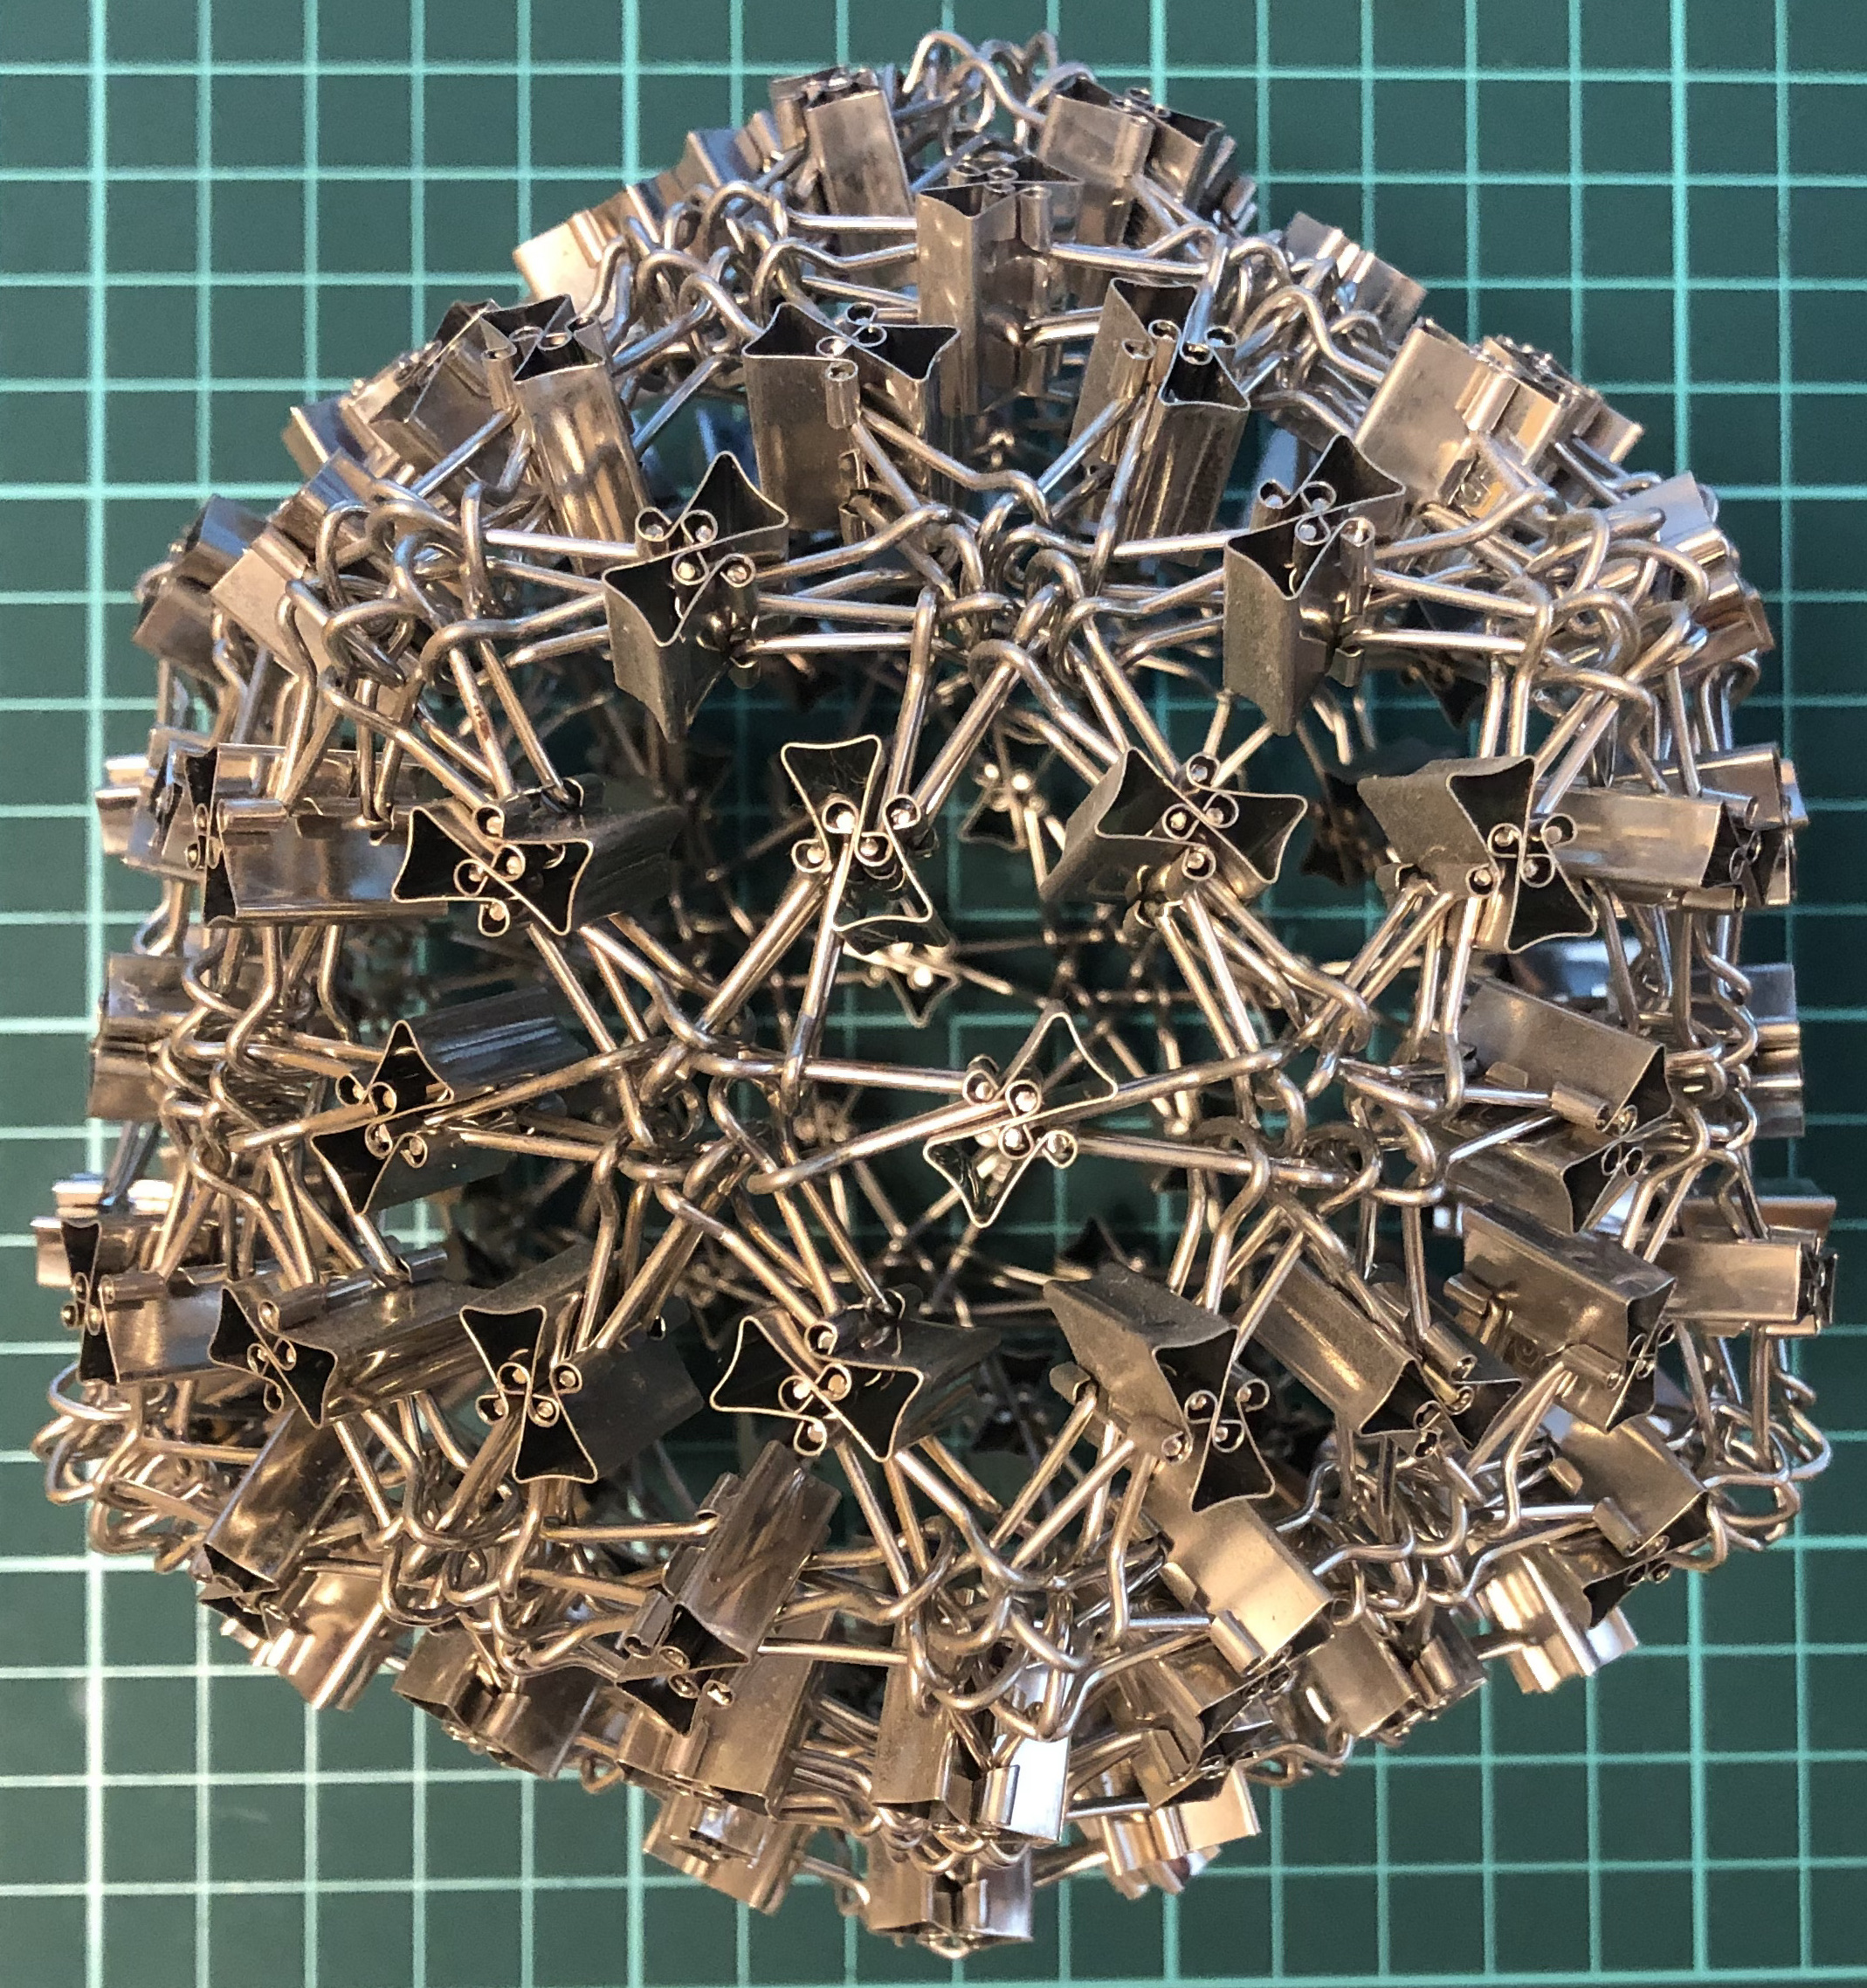 240 clips forming 120 I-edges forming pentakis icosidodecahedron